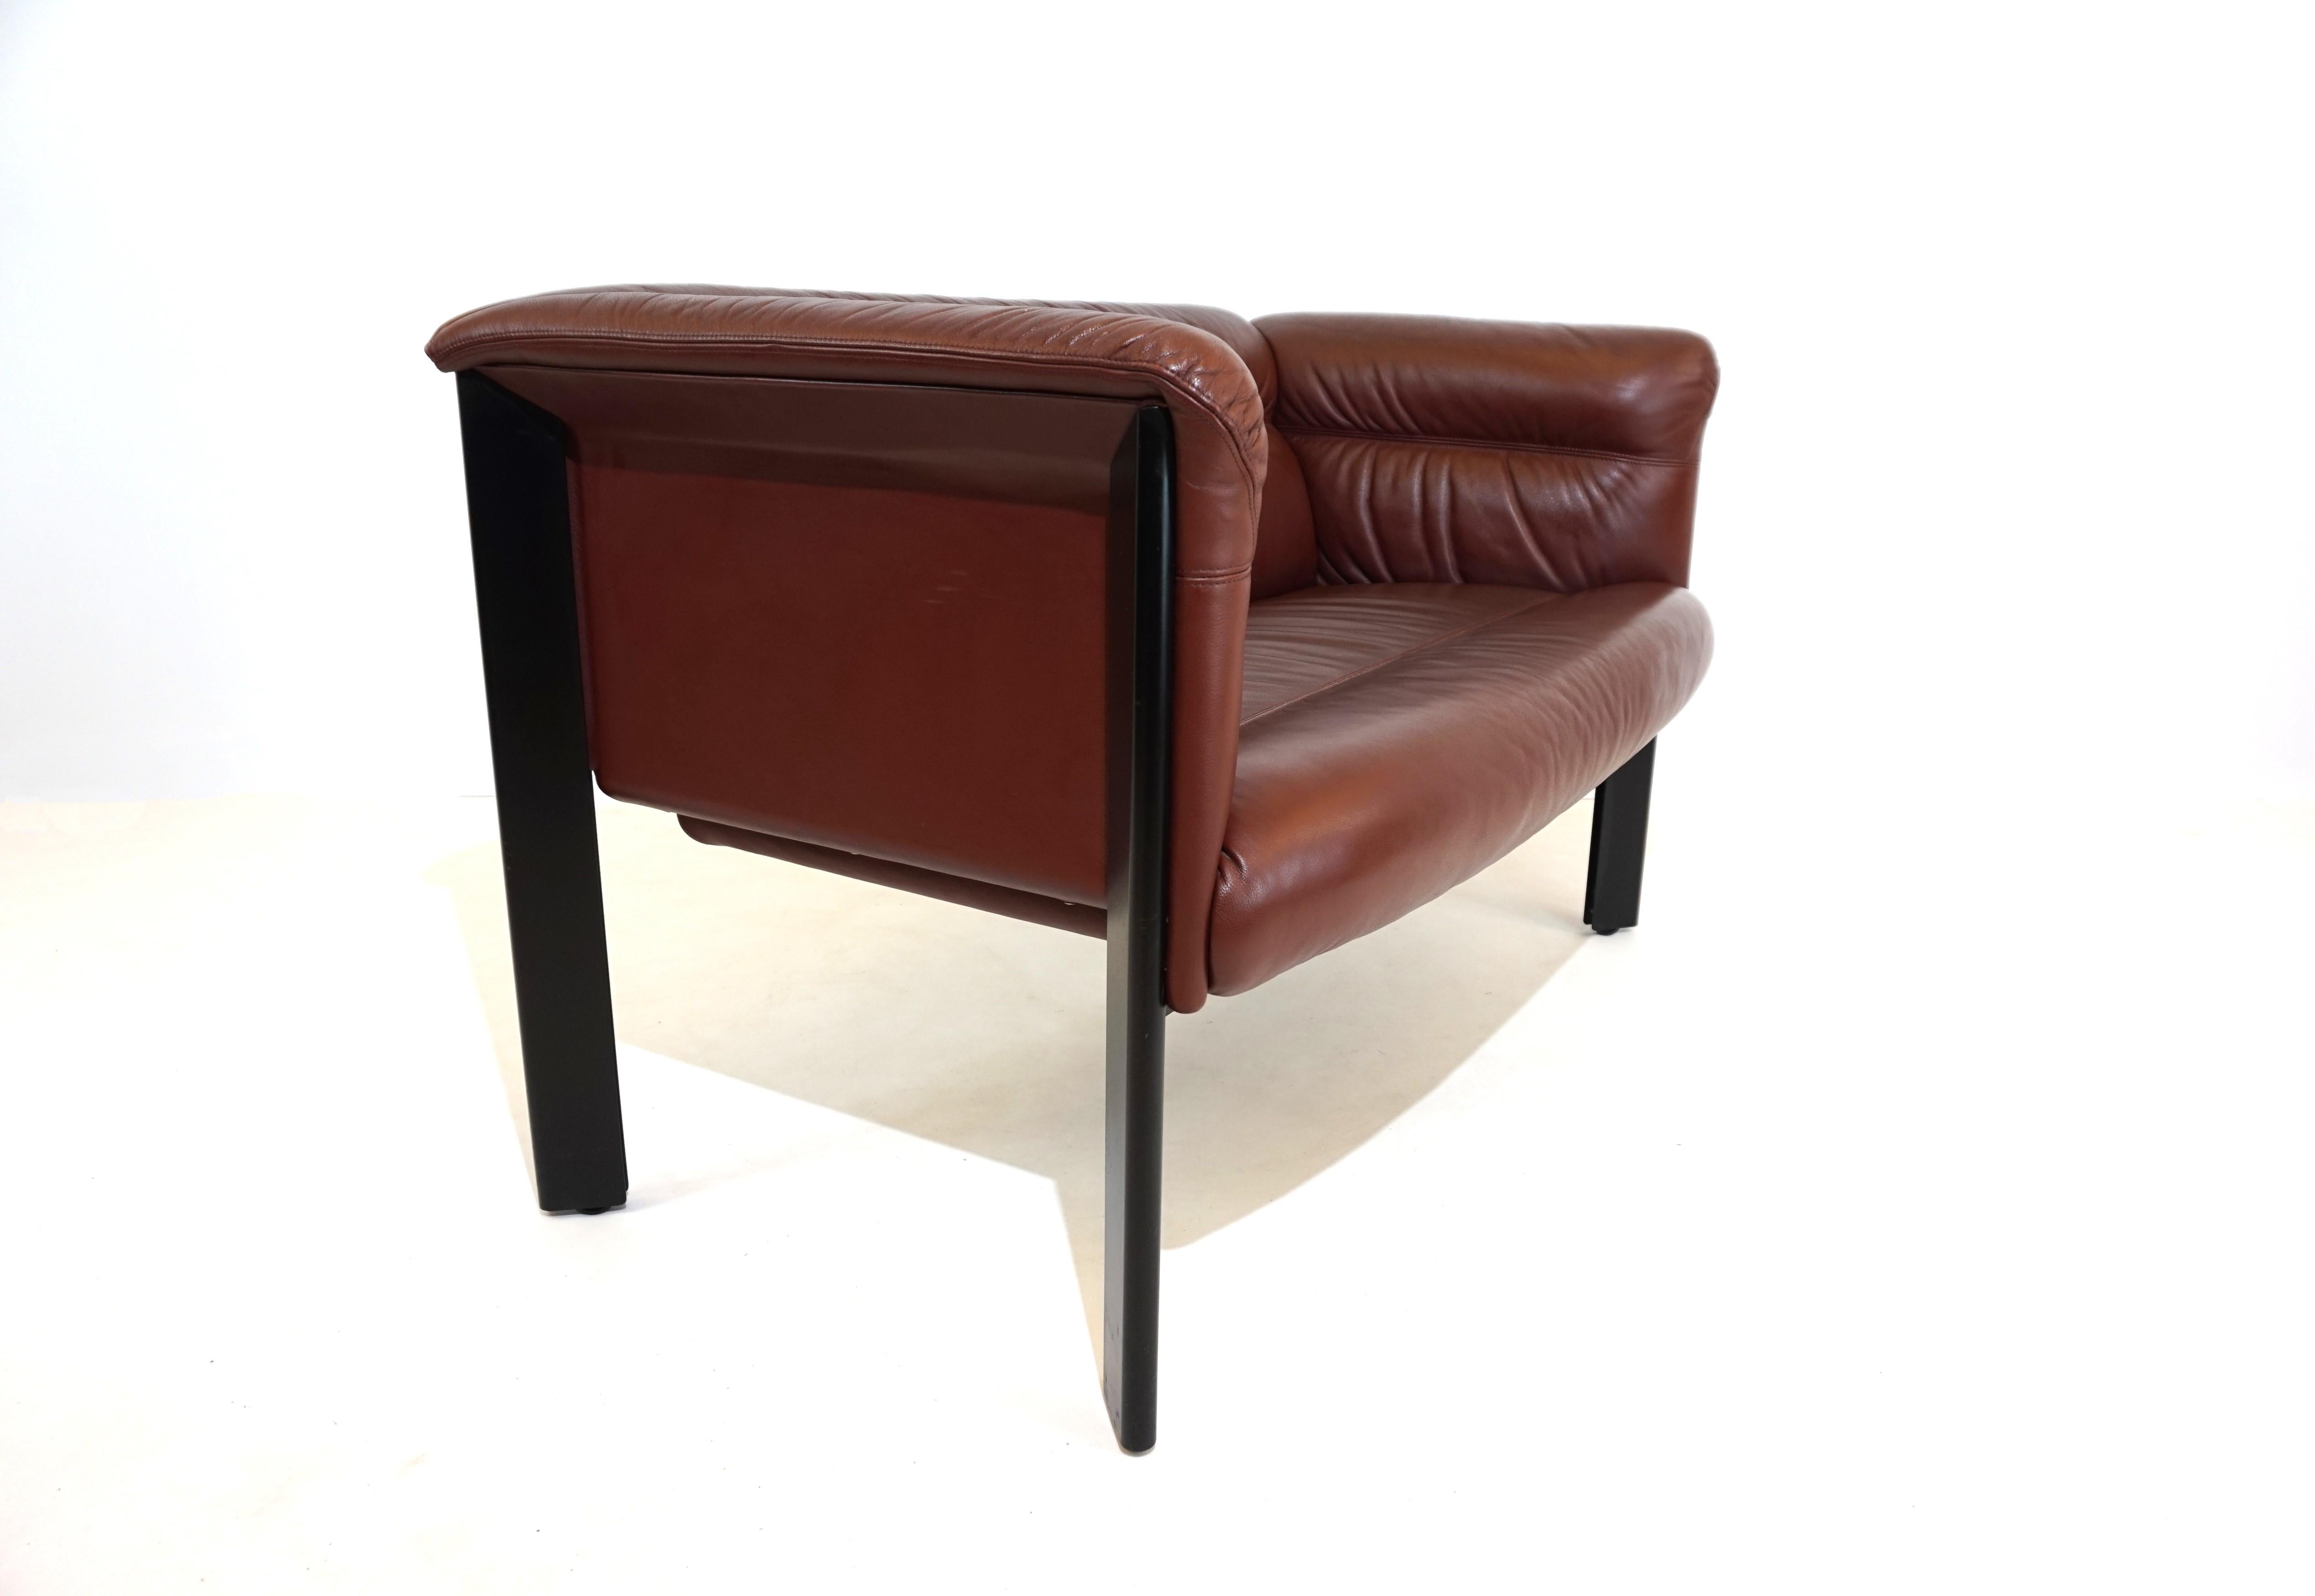 An exceptional Interlude 2 seater by Marco Zanuso for Poltrona Frau in excellent condition. The red-brown, soft leather of the armchairs only shows minimal signs of wear at the corners of the backrests. The leather paneling on the sides is in